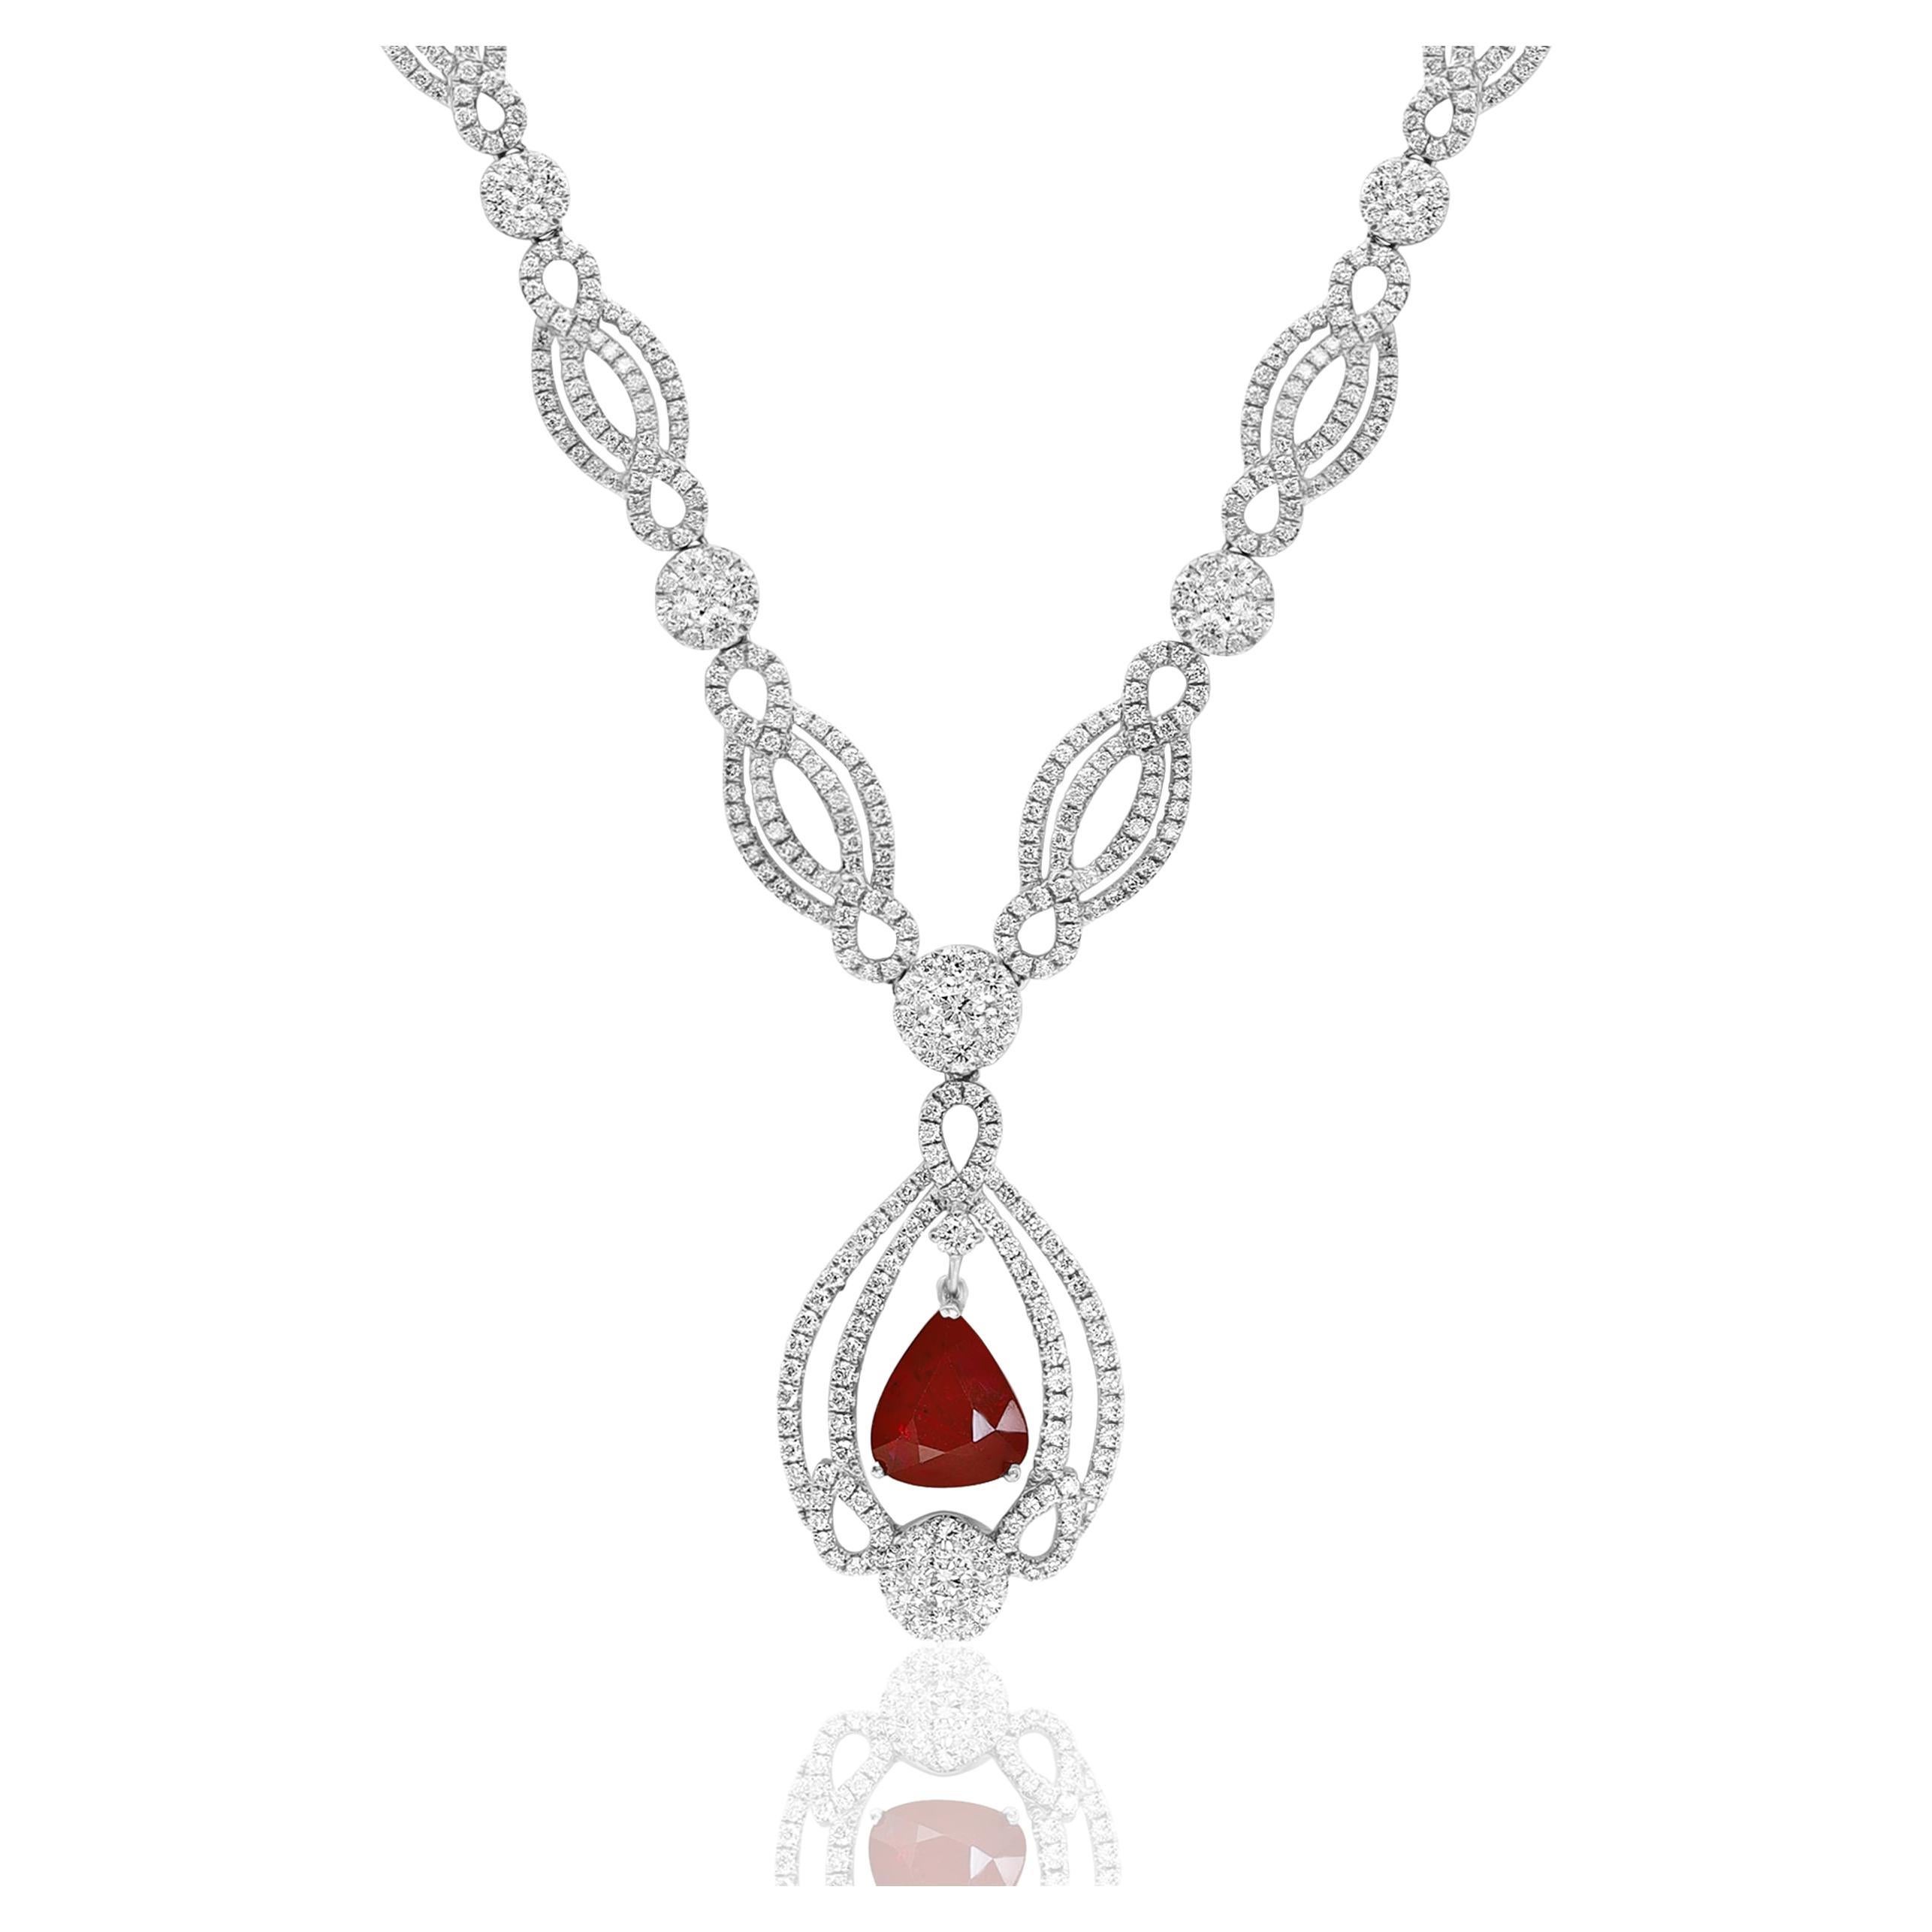 3.52 Carat Pear Shape Ruby and Diamond Necklace in 18 White Gold